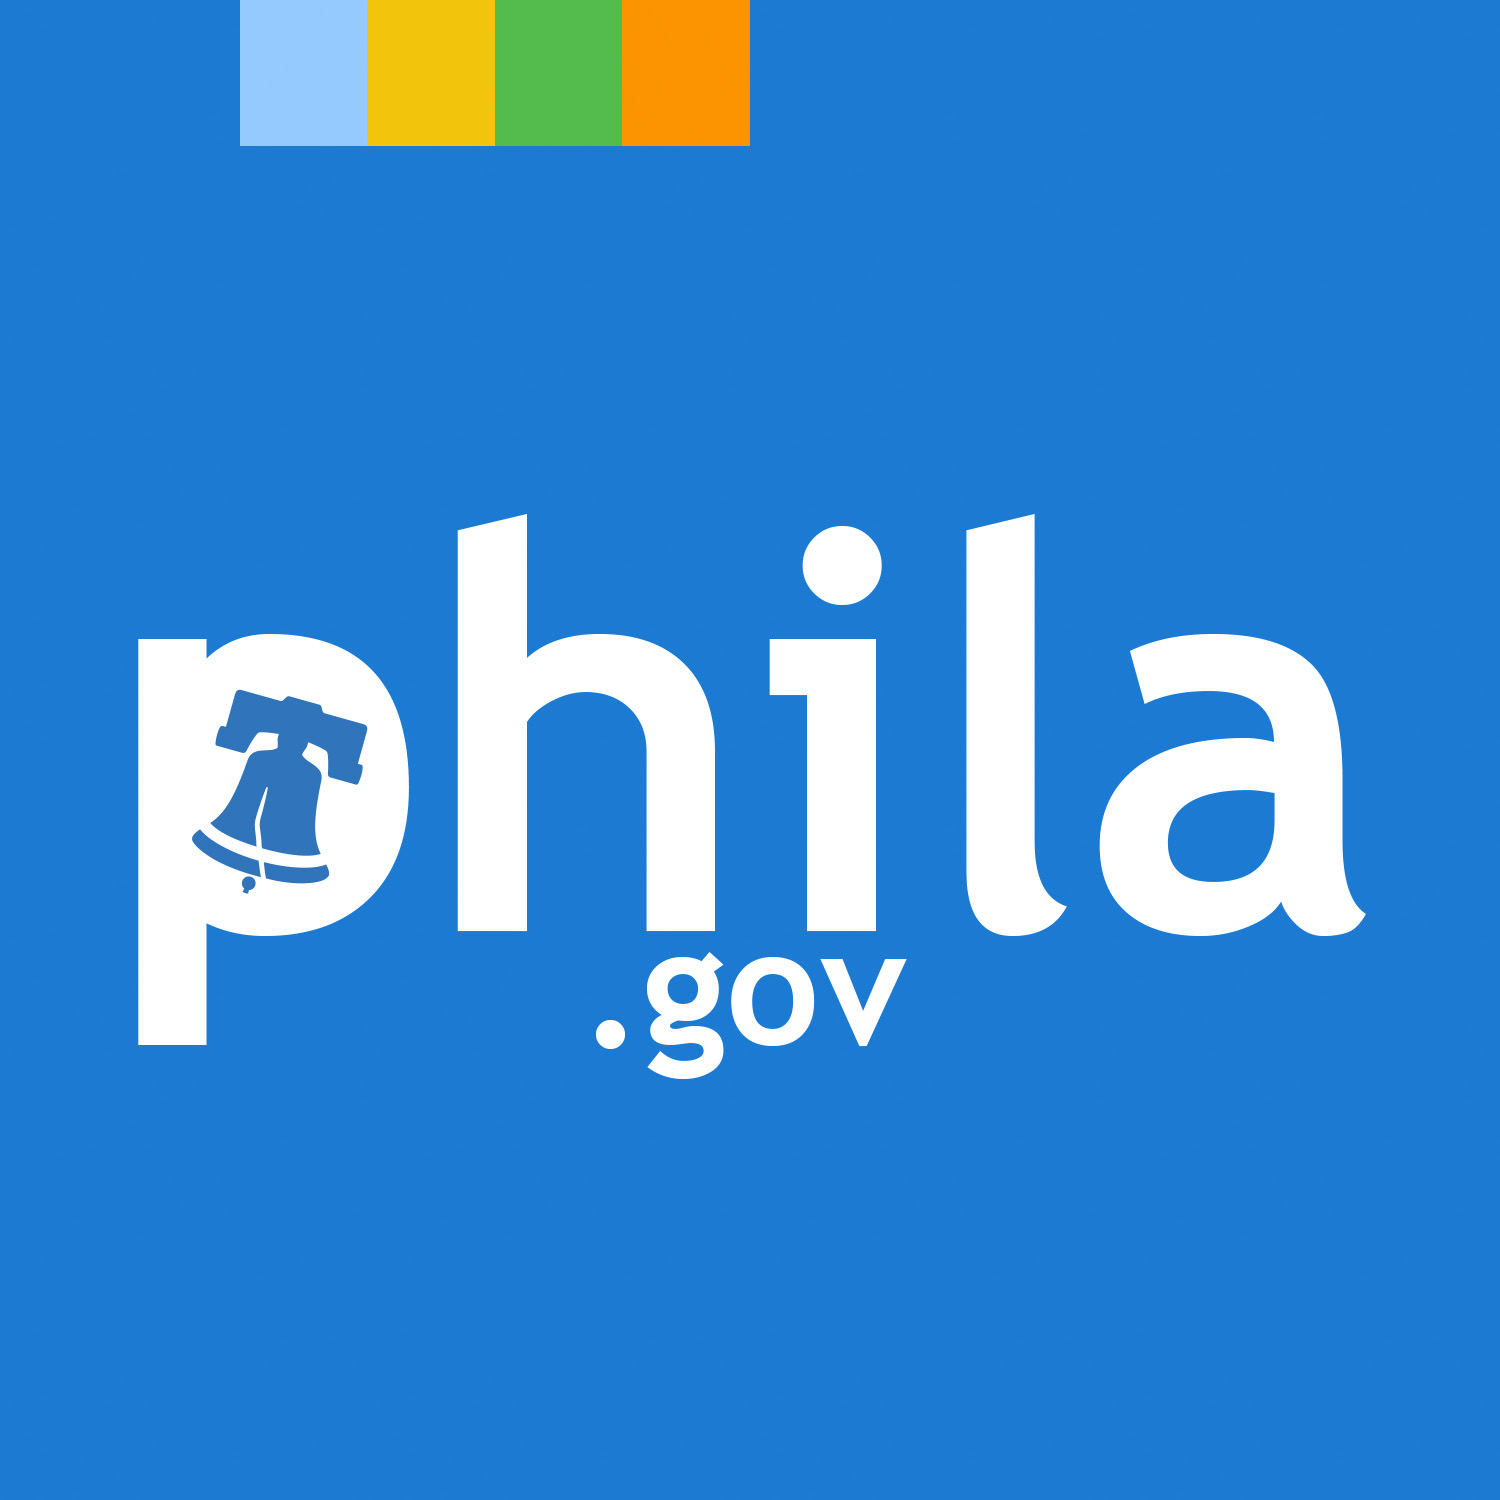 Standards, policies, and forms | City of Philadelphia